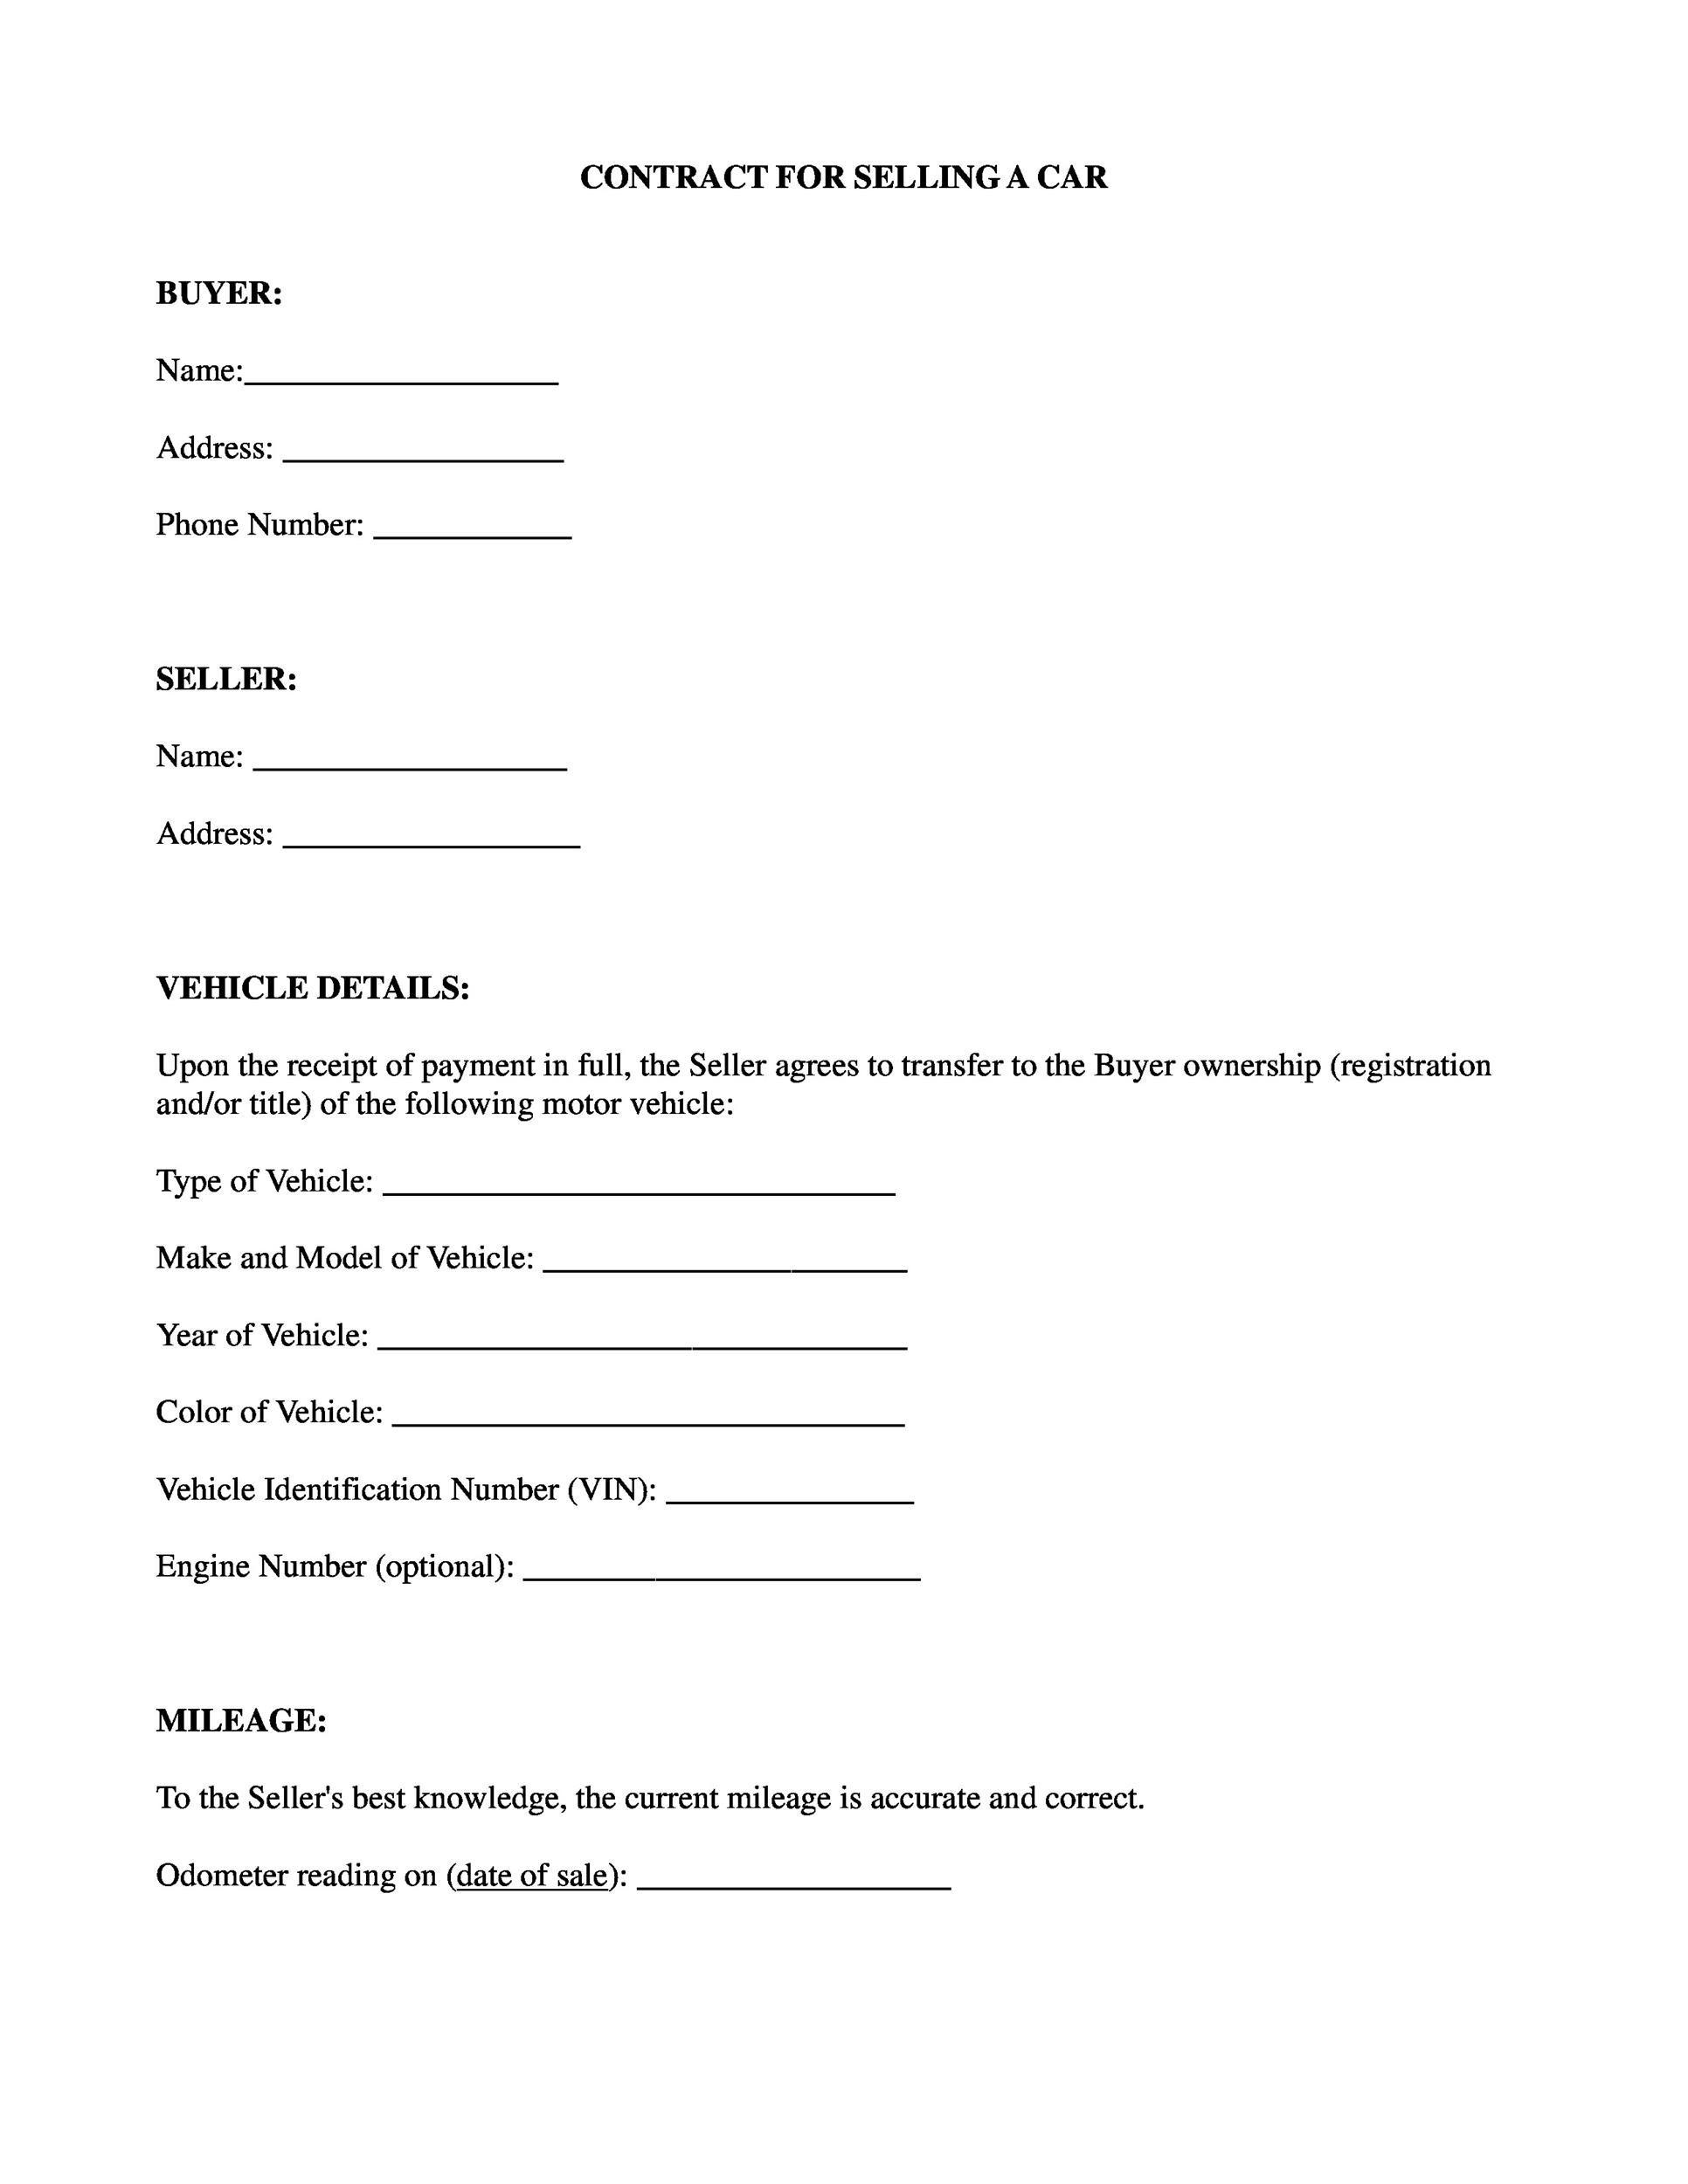 sales-contract-template-12-free-word-pdf-documents-download-free